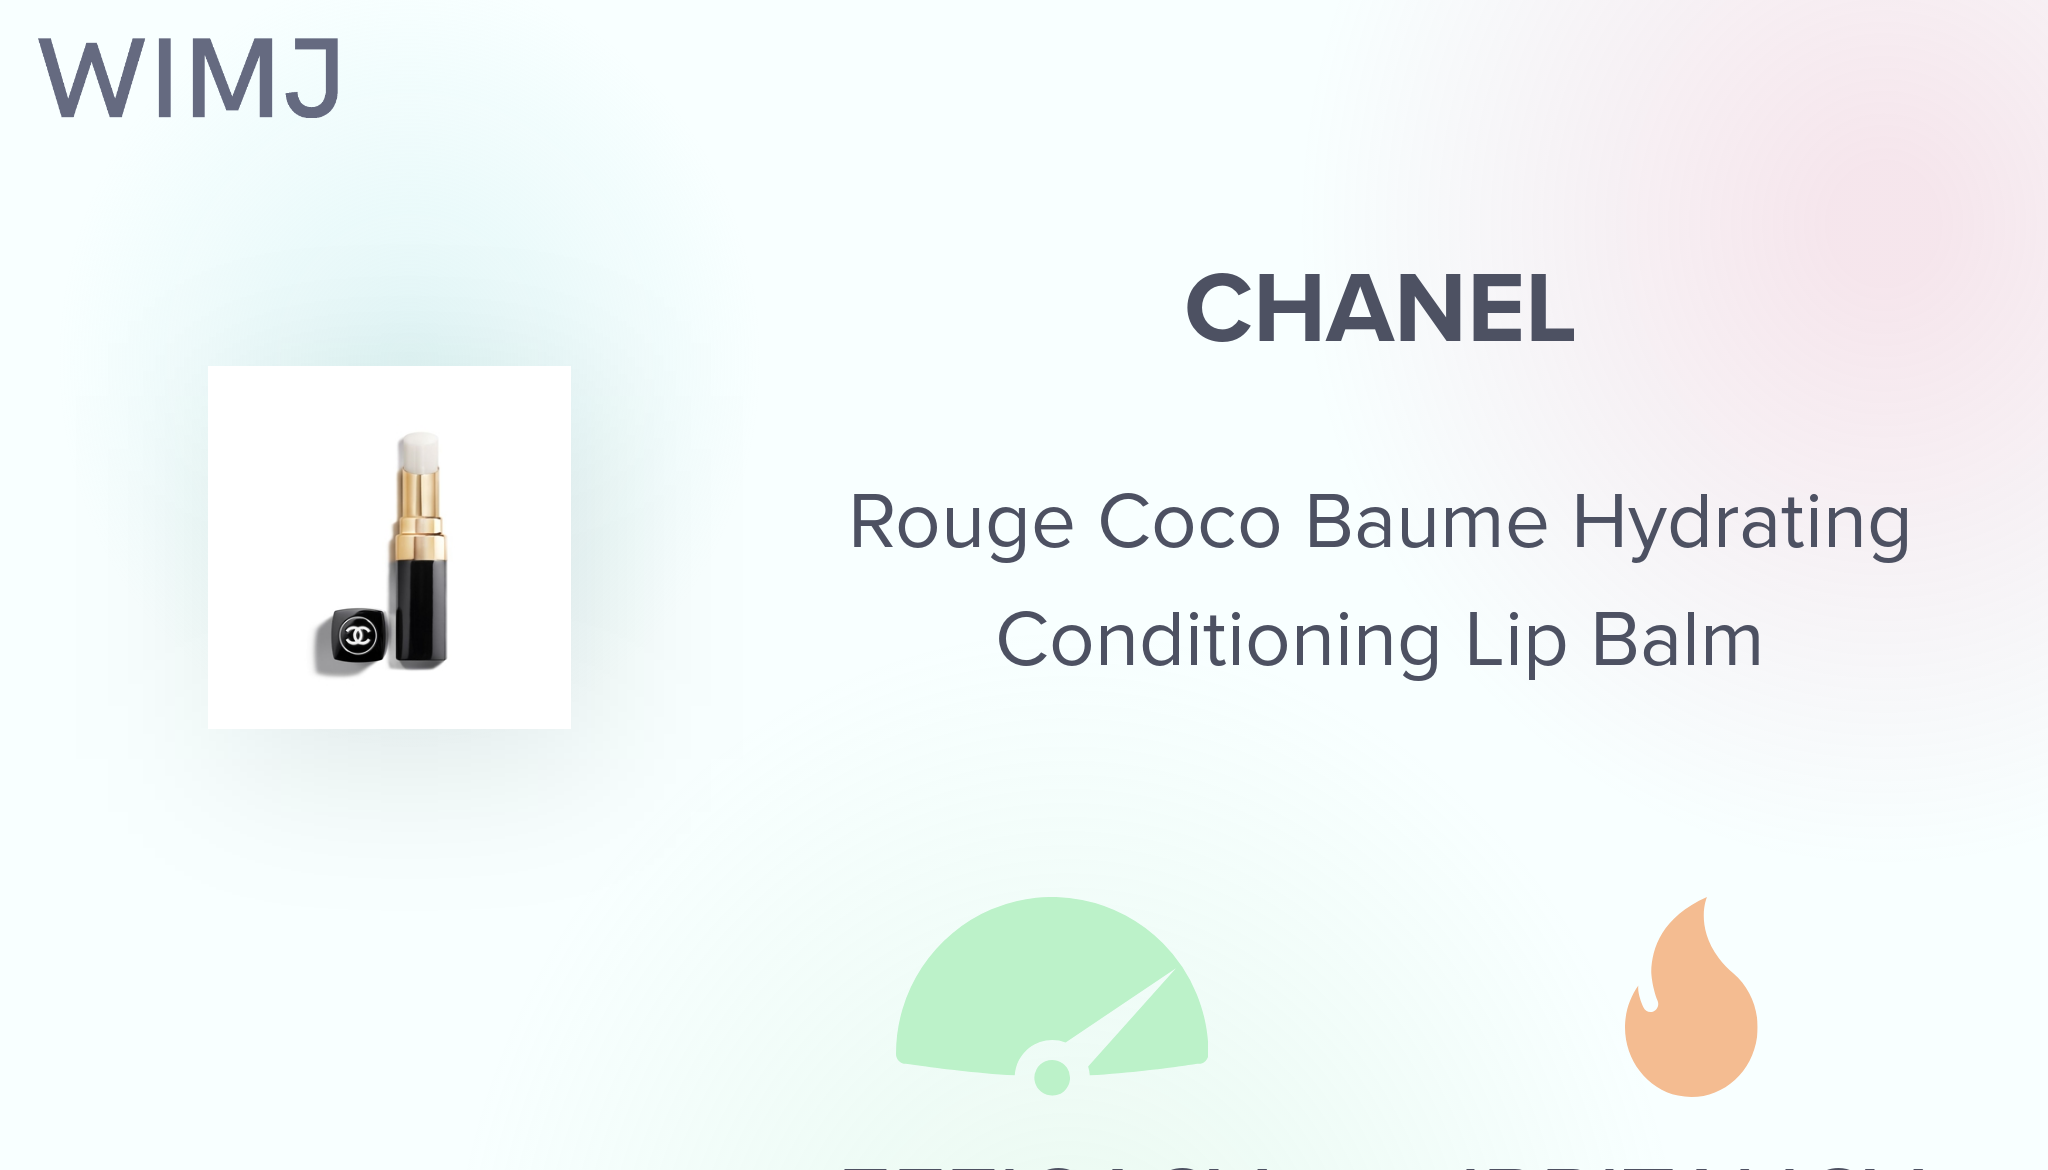 Review: CHANEL - Rouge Coco Baume Hydrating Conditioning Lip Balm